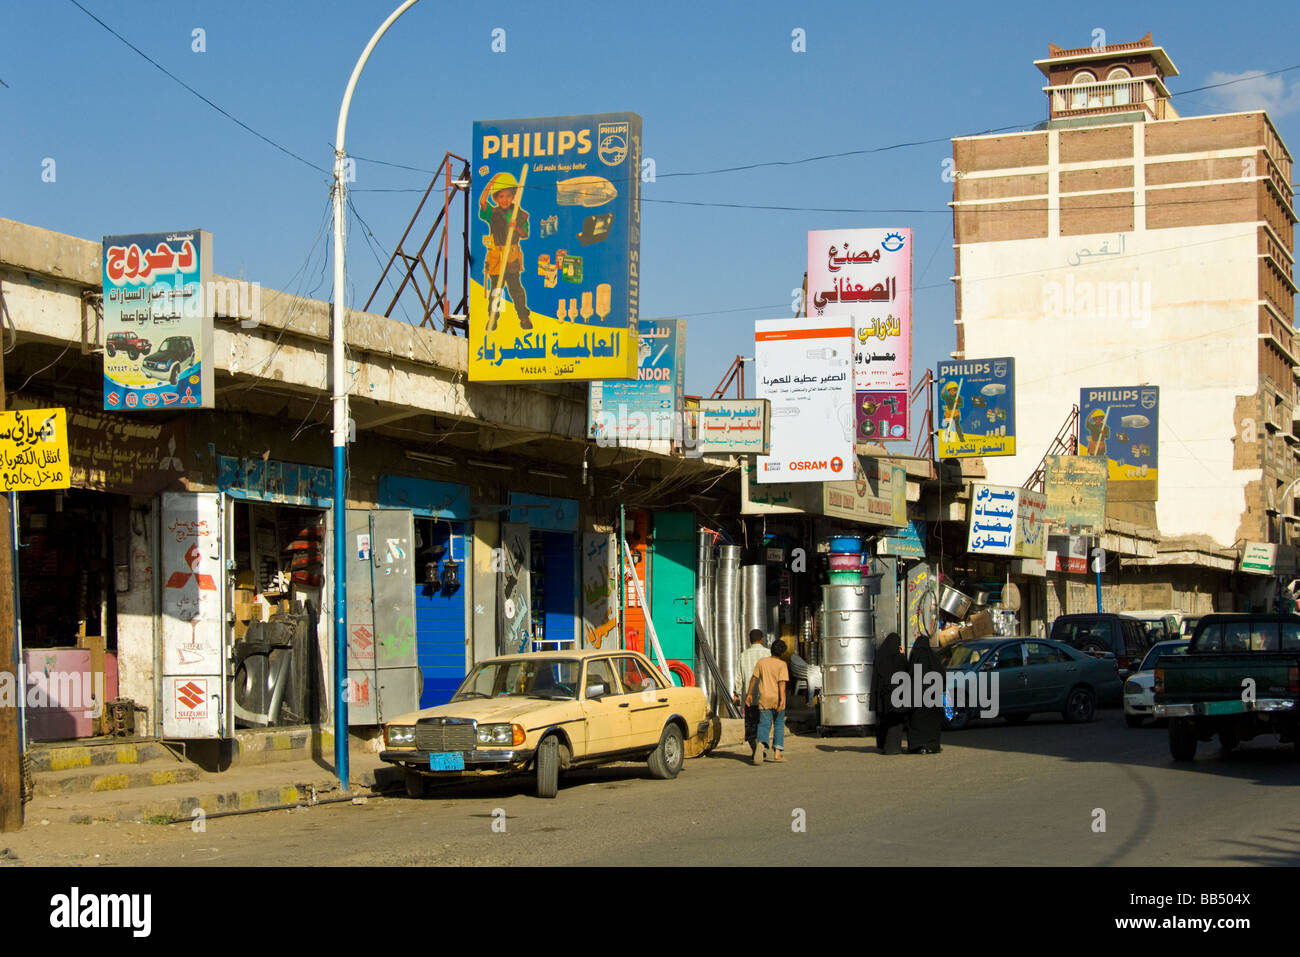 Shops near the old town district of Sana'a Yemen Stock Photo